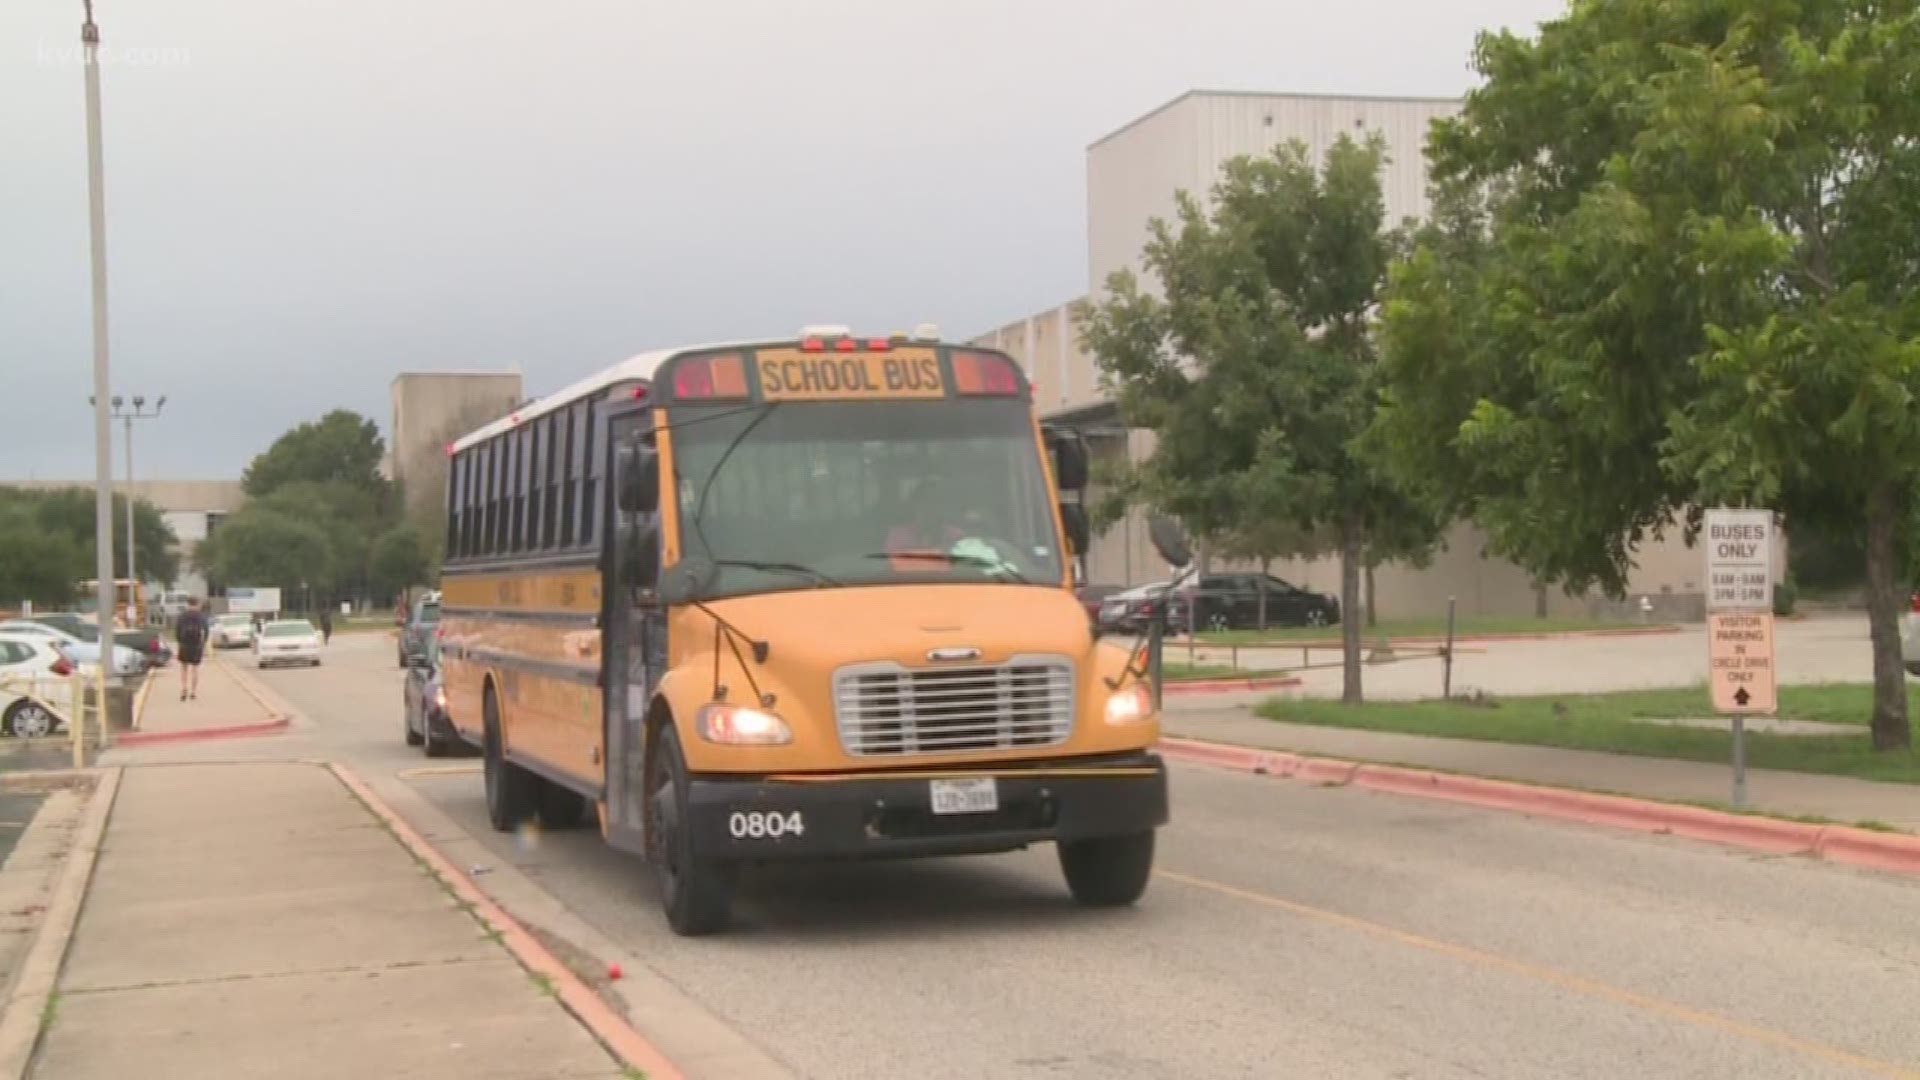 You can expect tighter security this graduation season for Central Texas schools.